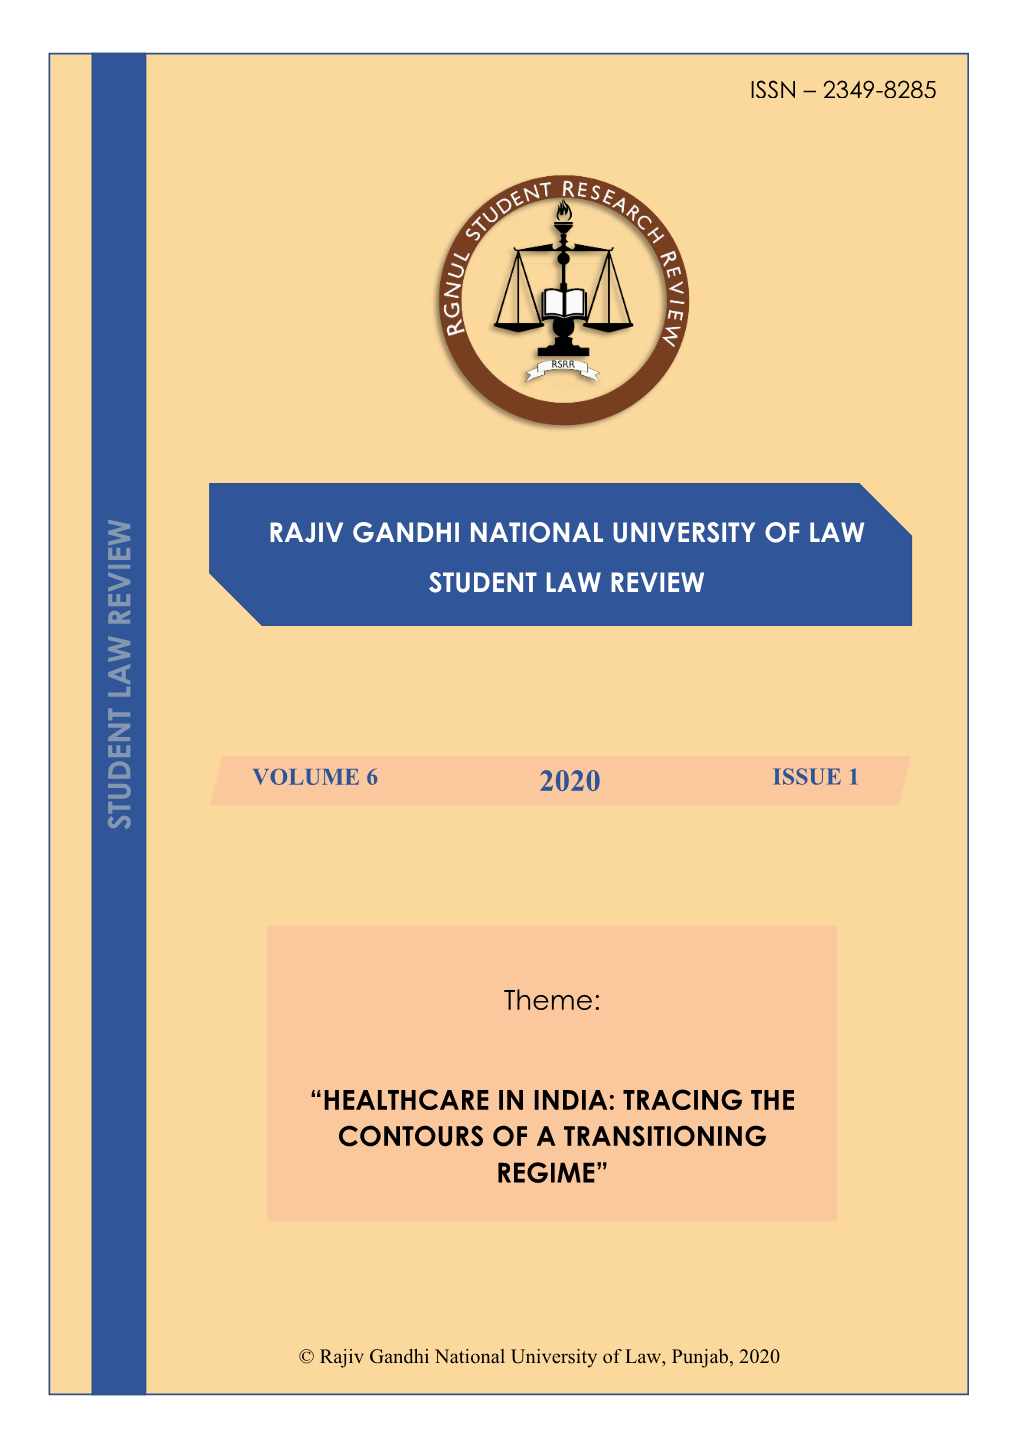 Student Law Review 2020